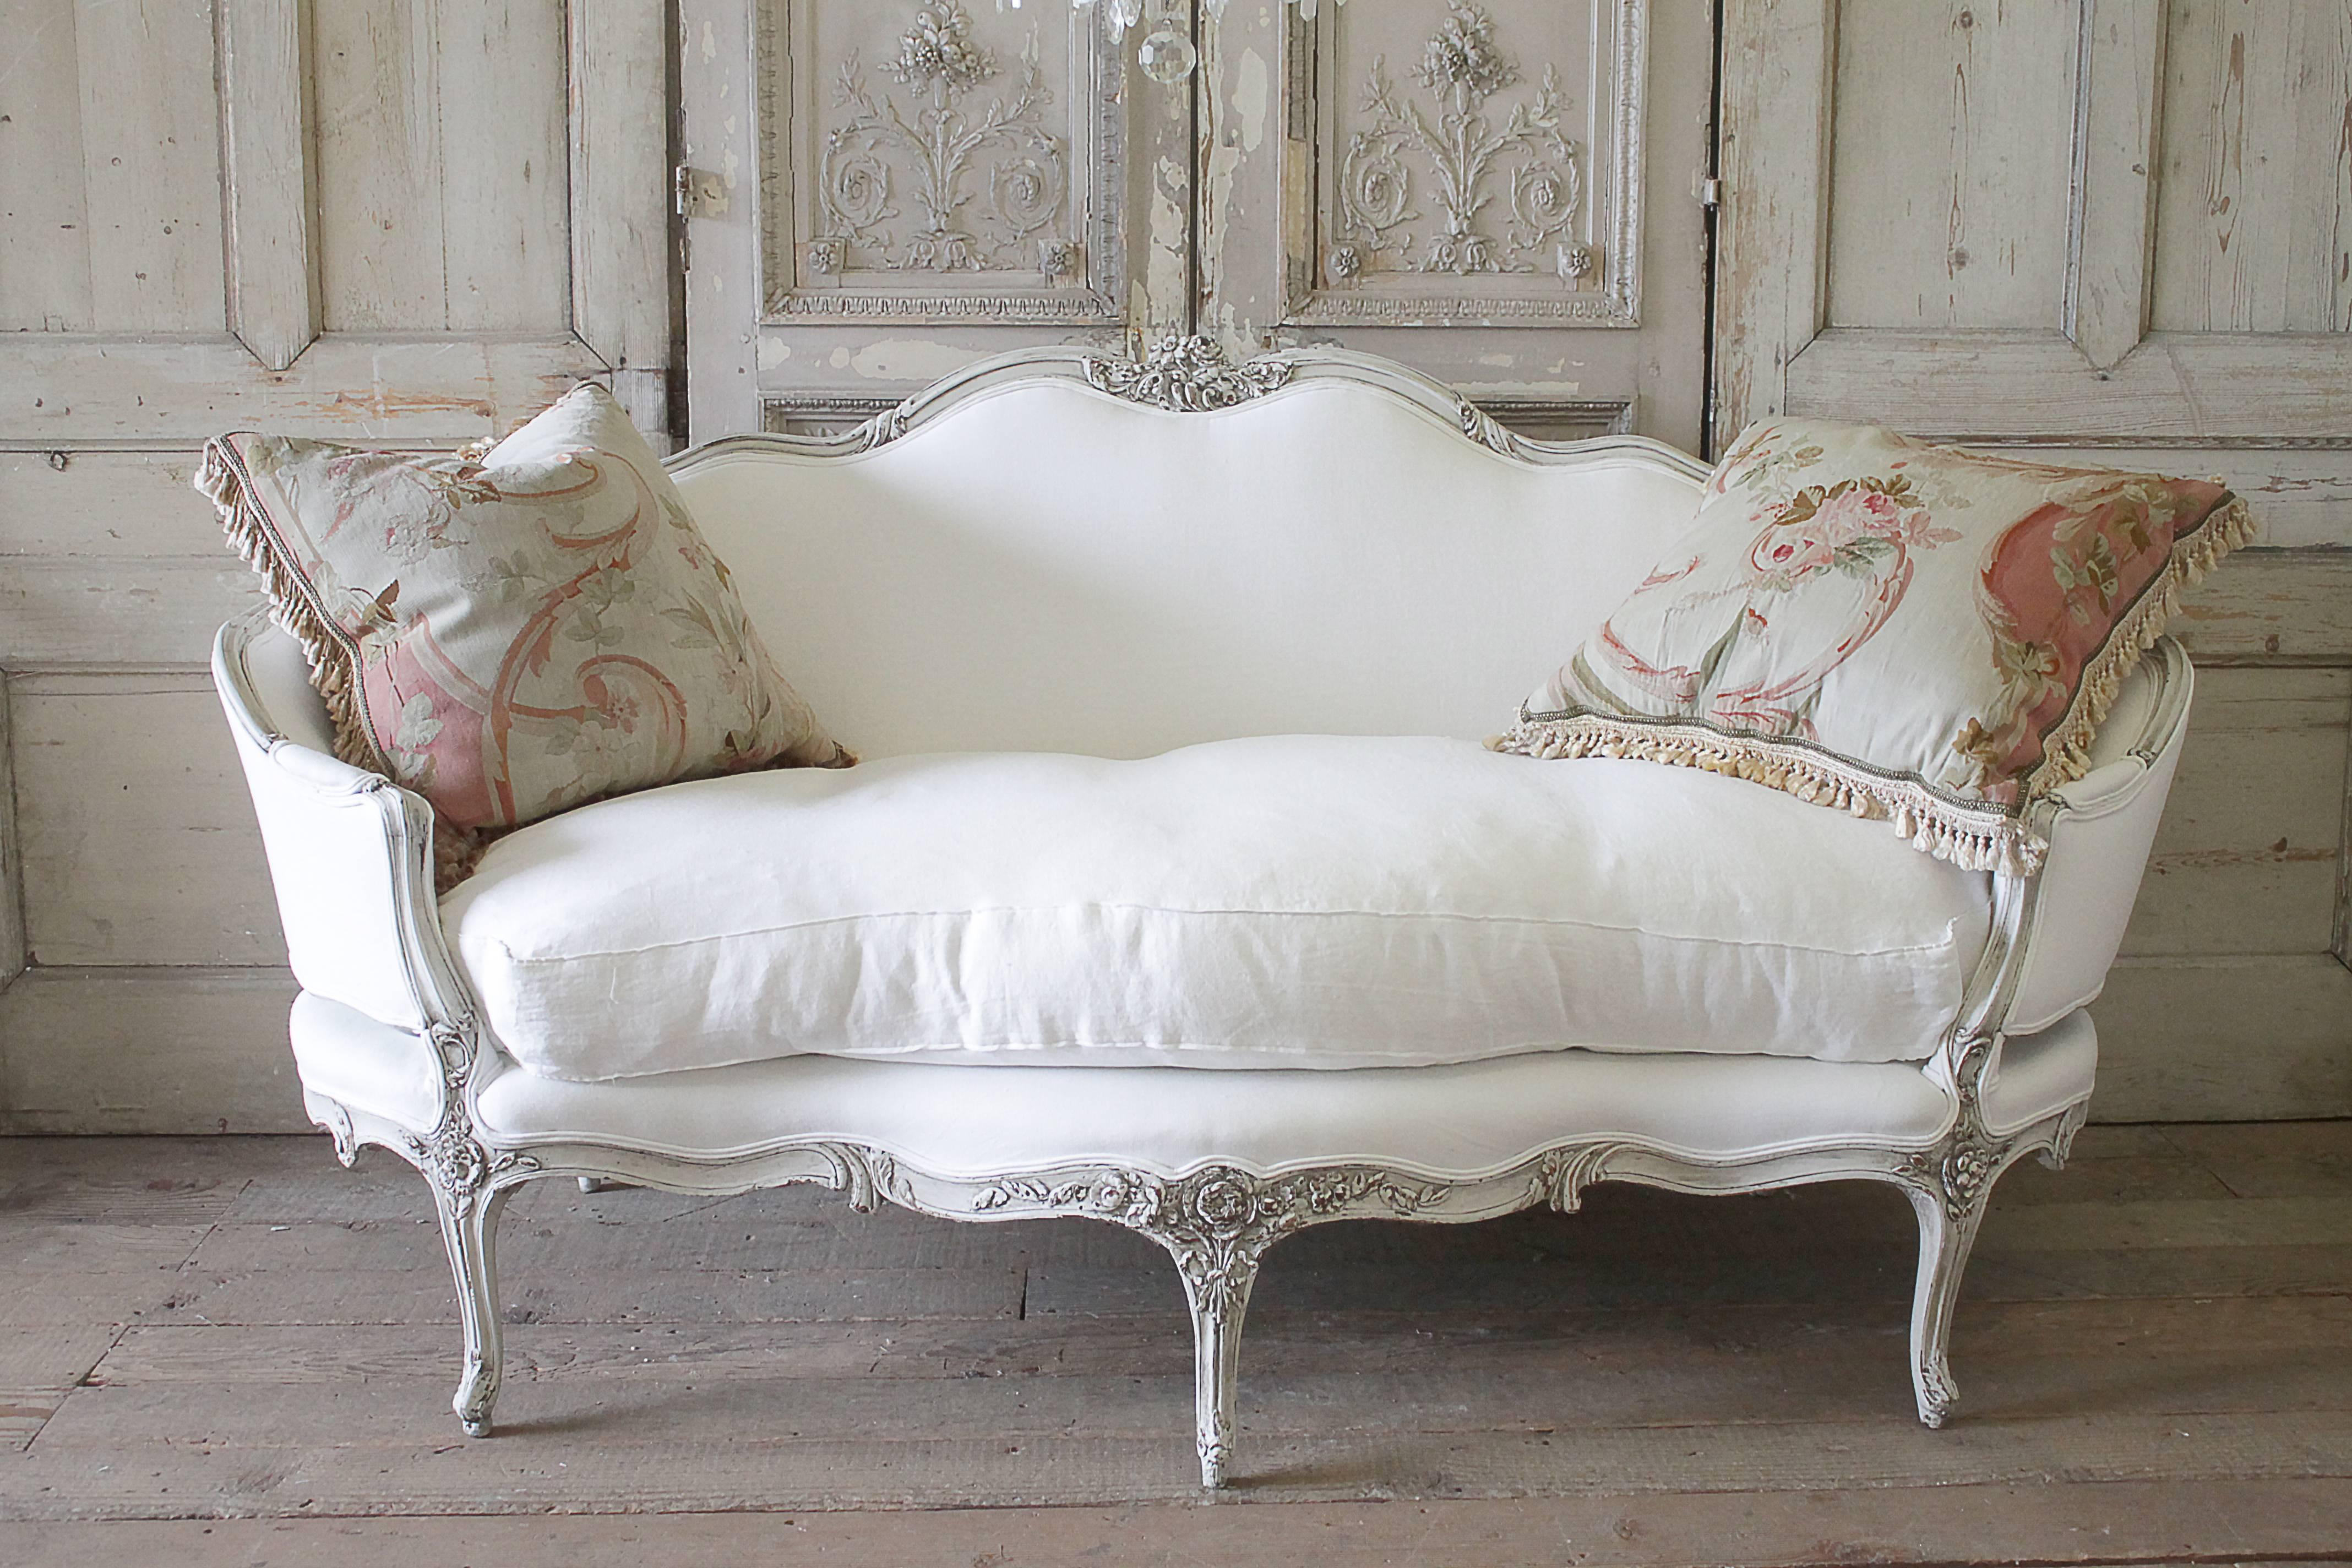 Exquisite French Louis XV style sofa with large carved roses, leaves and ribbons. We have refinished this sofa in a oyster greige finish with distressed edges, and antique patina. The color is pale grey finish with antiquing you would see if it were